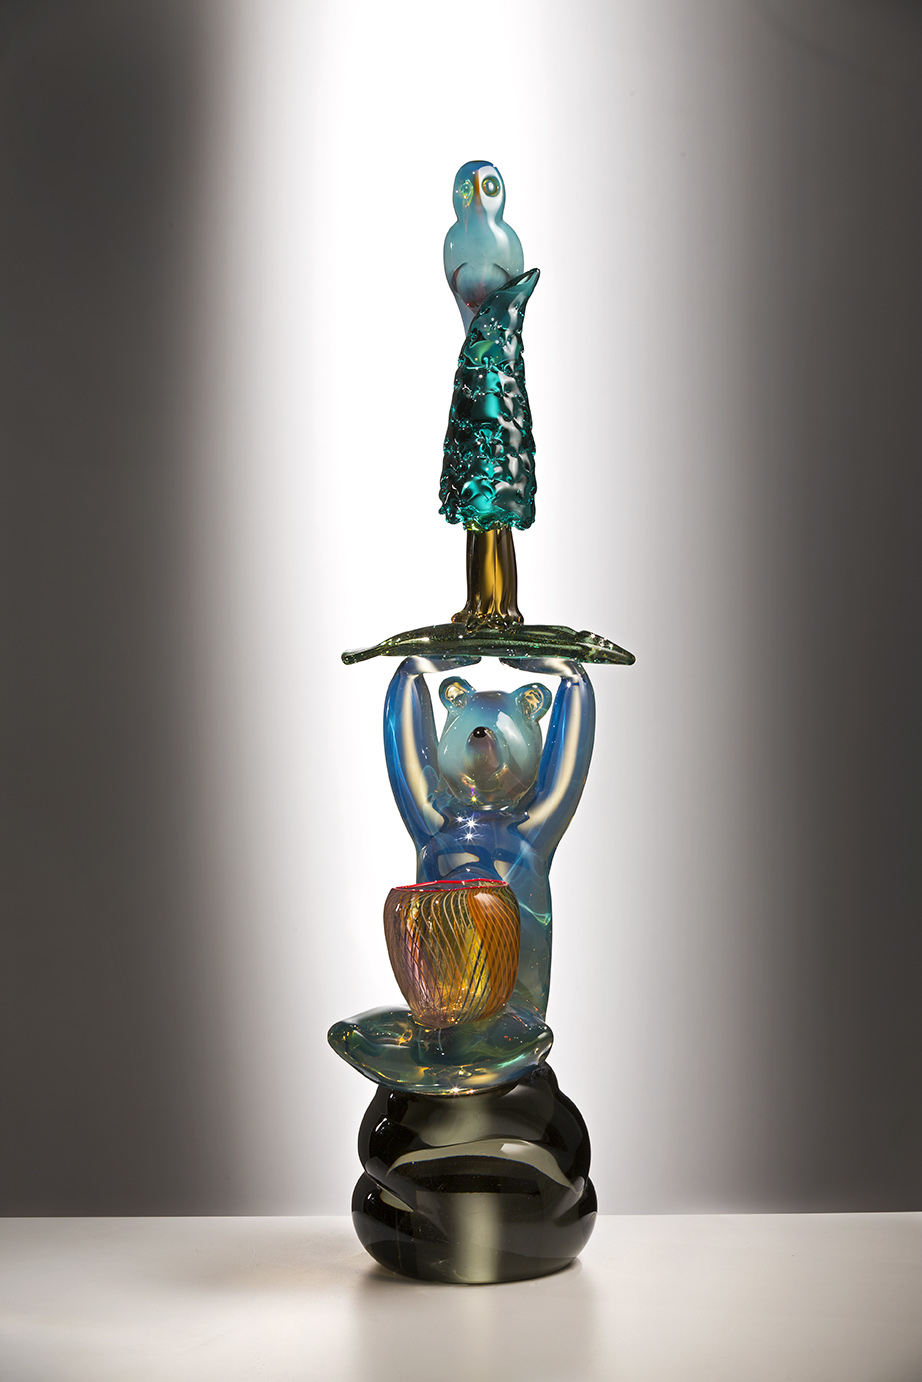 A glass sculpture featuring a bear holding up a tree with a bird at the top